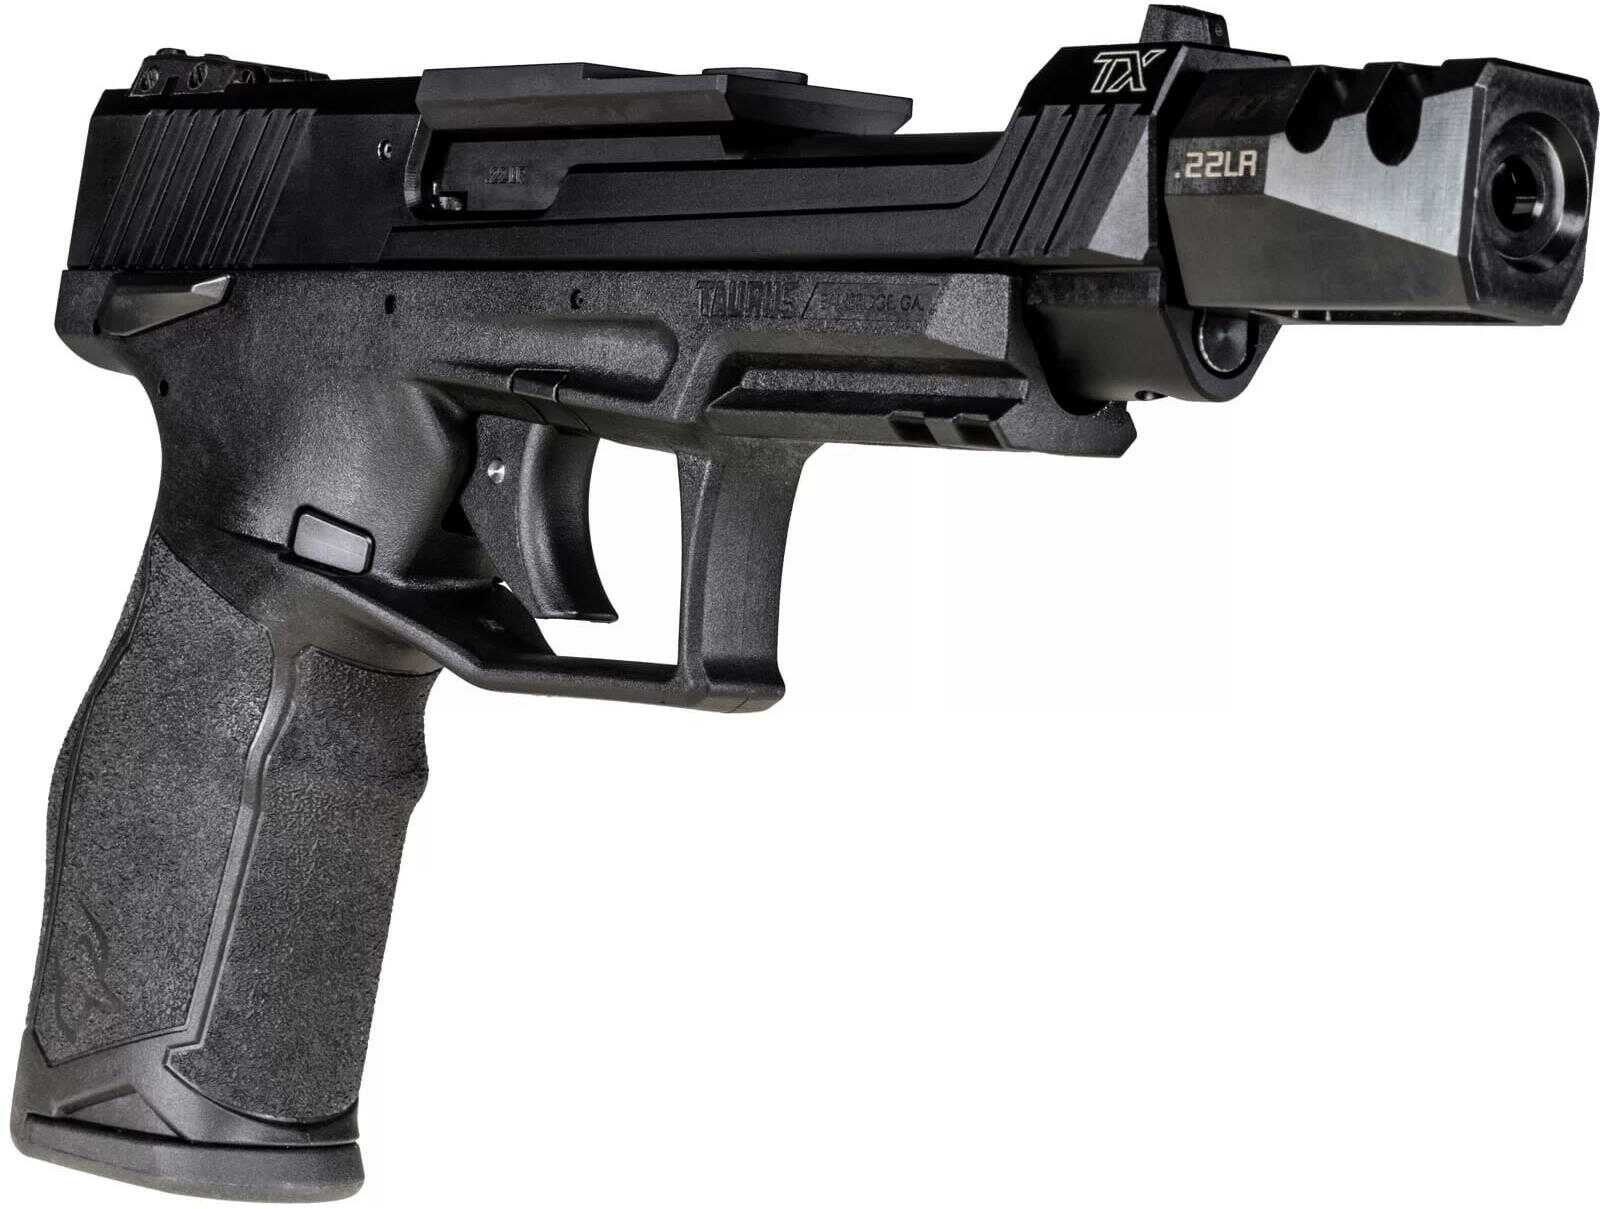 Taurus TX22 Competition SCR Striker Fired Semi-Automatic Pistol .22 Long Rifle 5.25" Threaded Barrel (3)-16Rd Magazines White Dot Adjustable Sights Black Polymer Finish